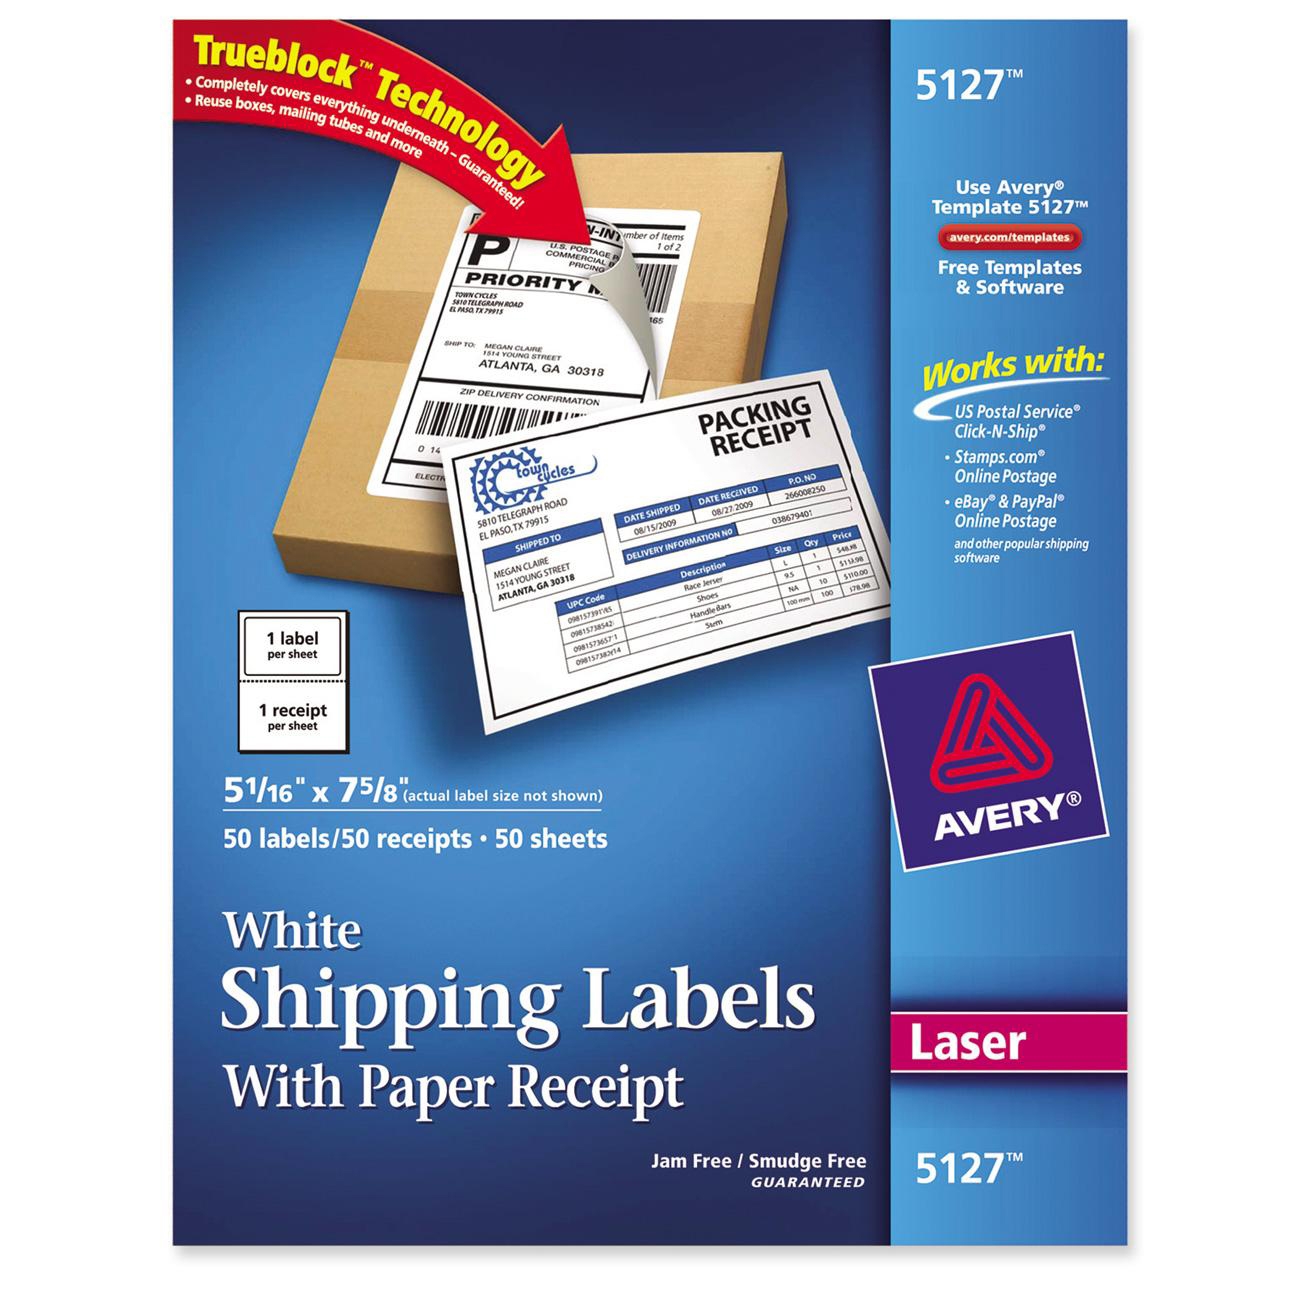 how-to-print-labels-24-per-page-avery-address-laser-labels-24-labels-per-sheet-100-sheets